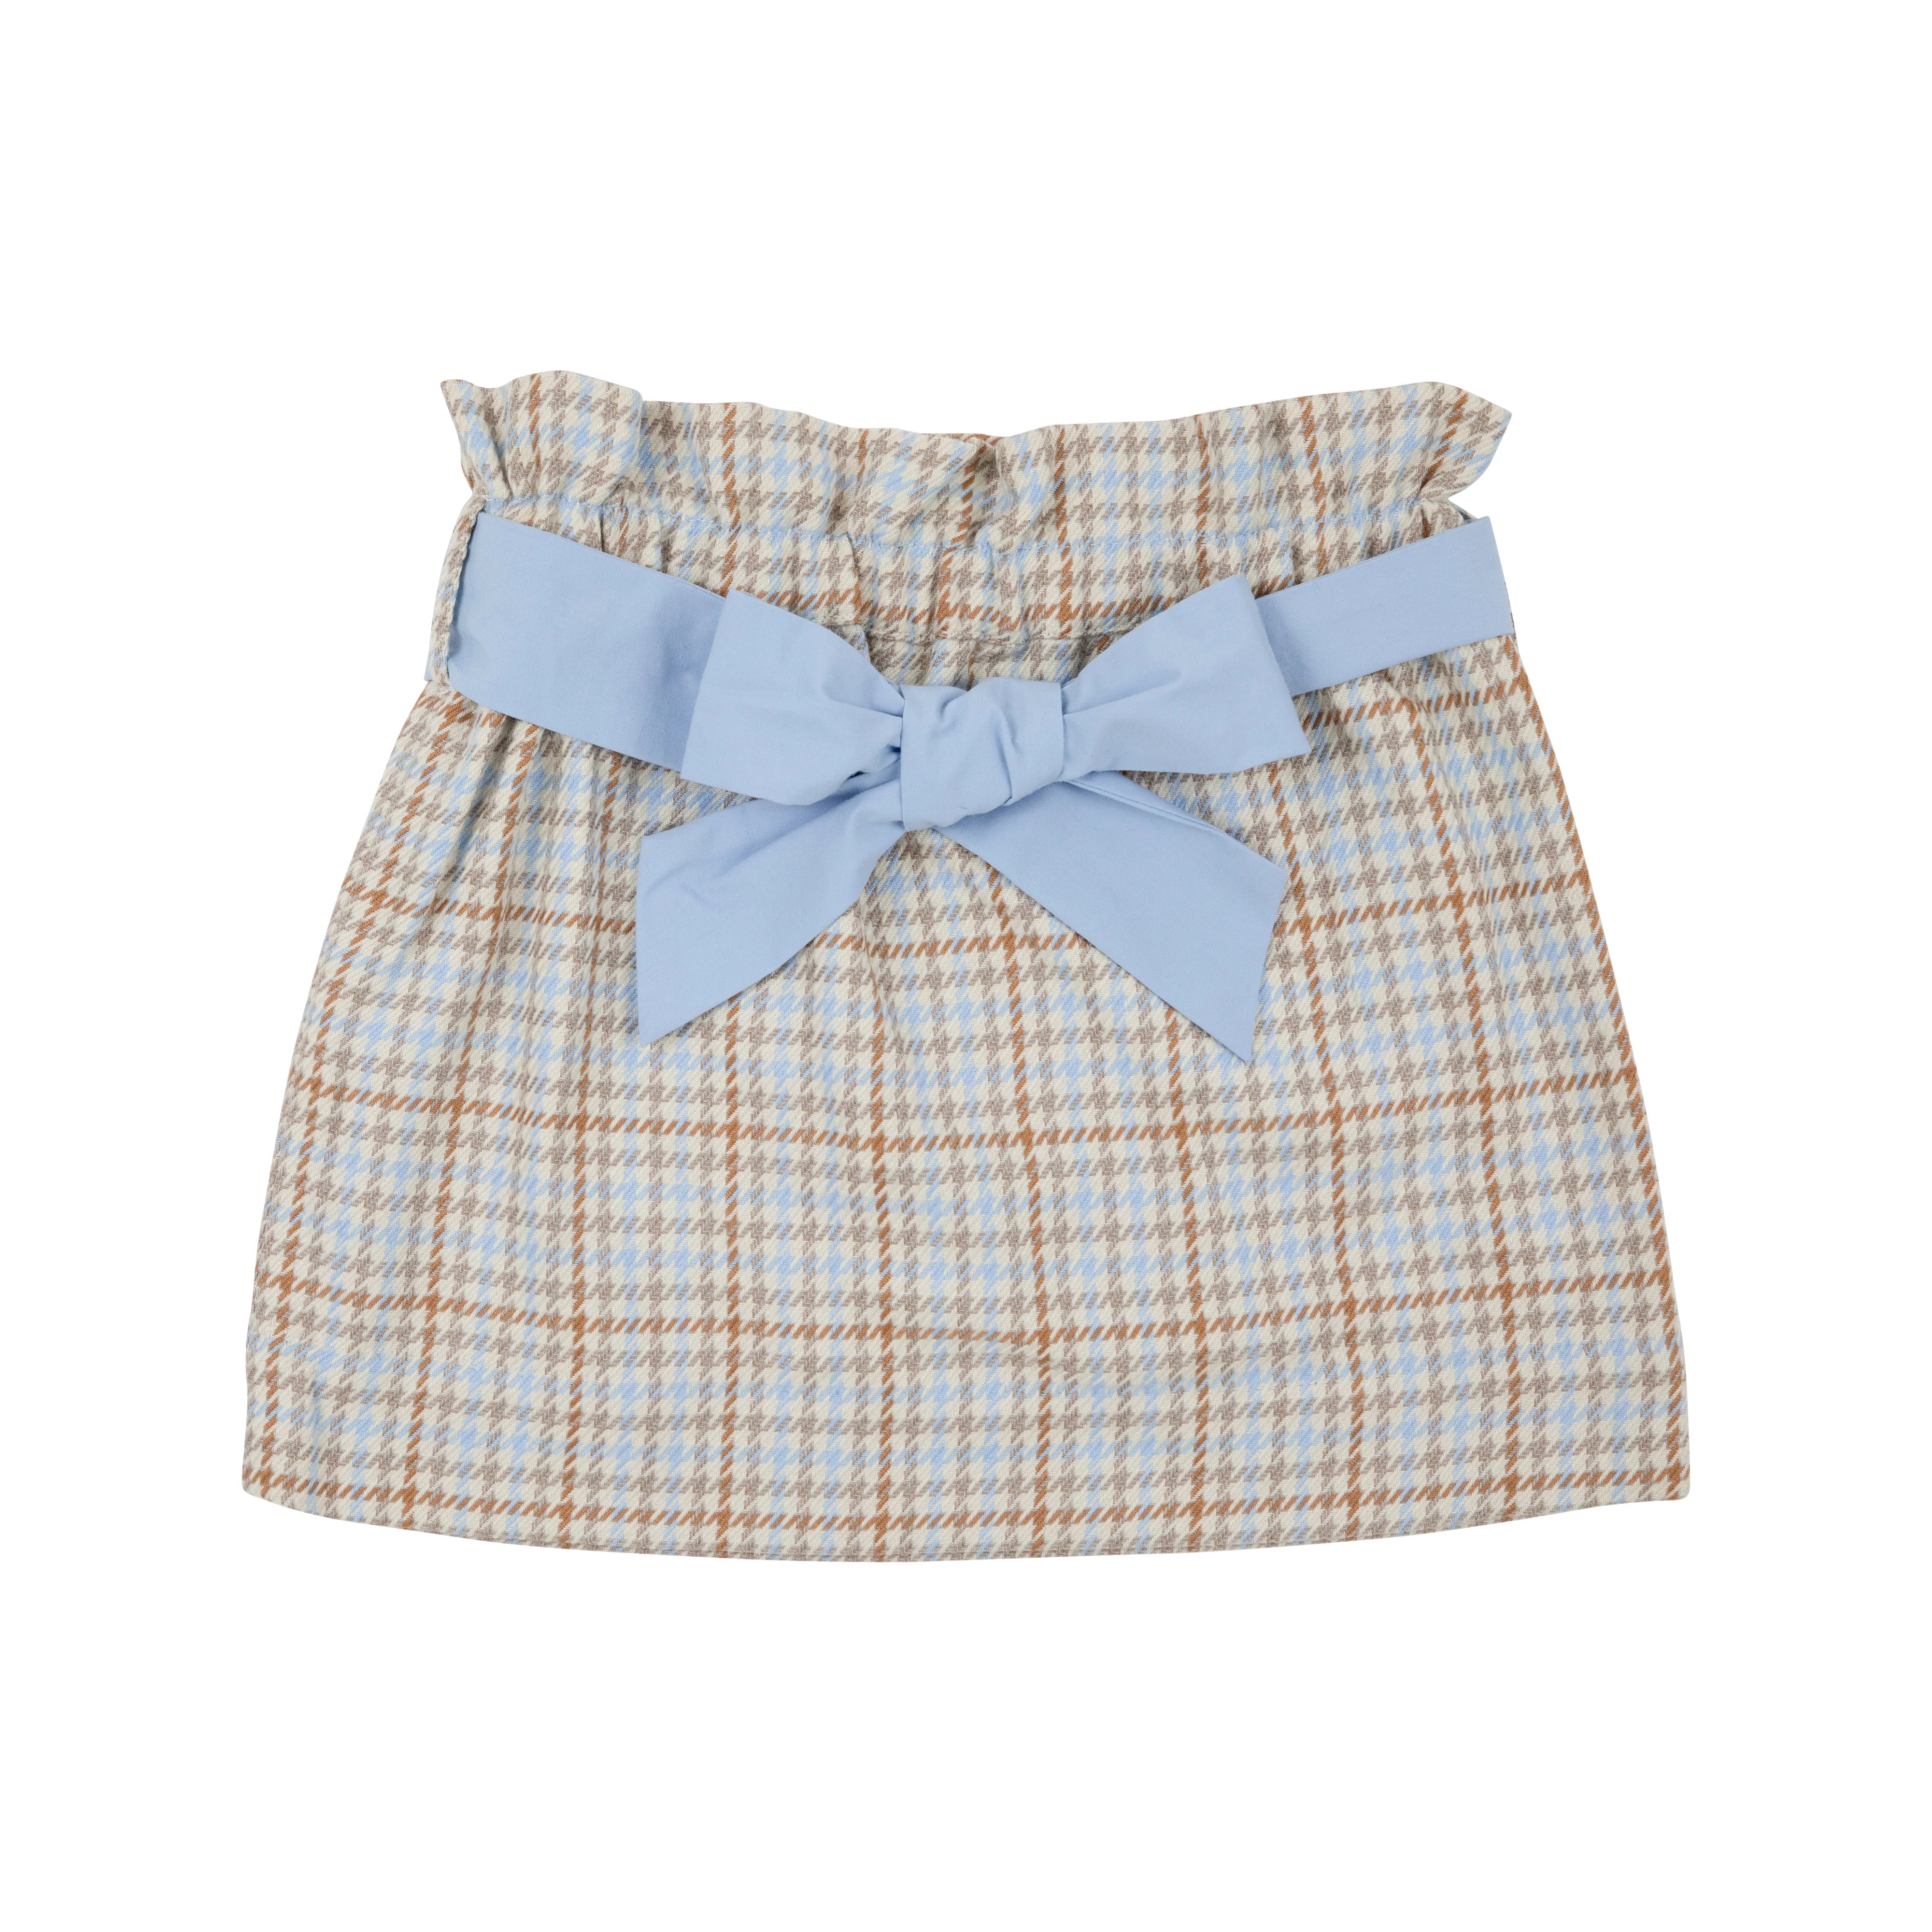 TBBC Beasley Bow Skirt Henry Clay Houndstooth